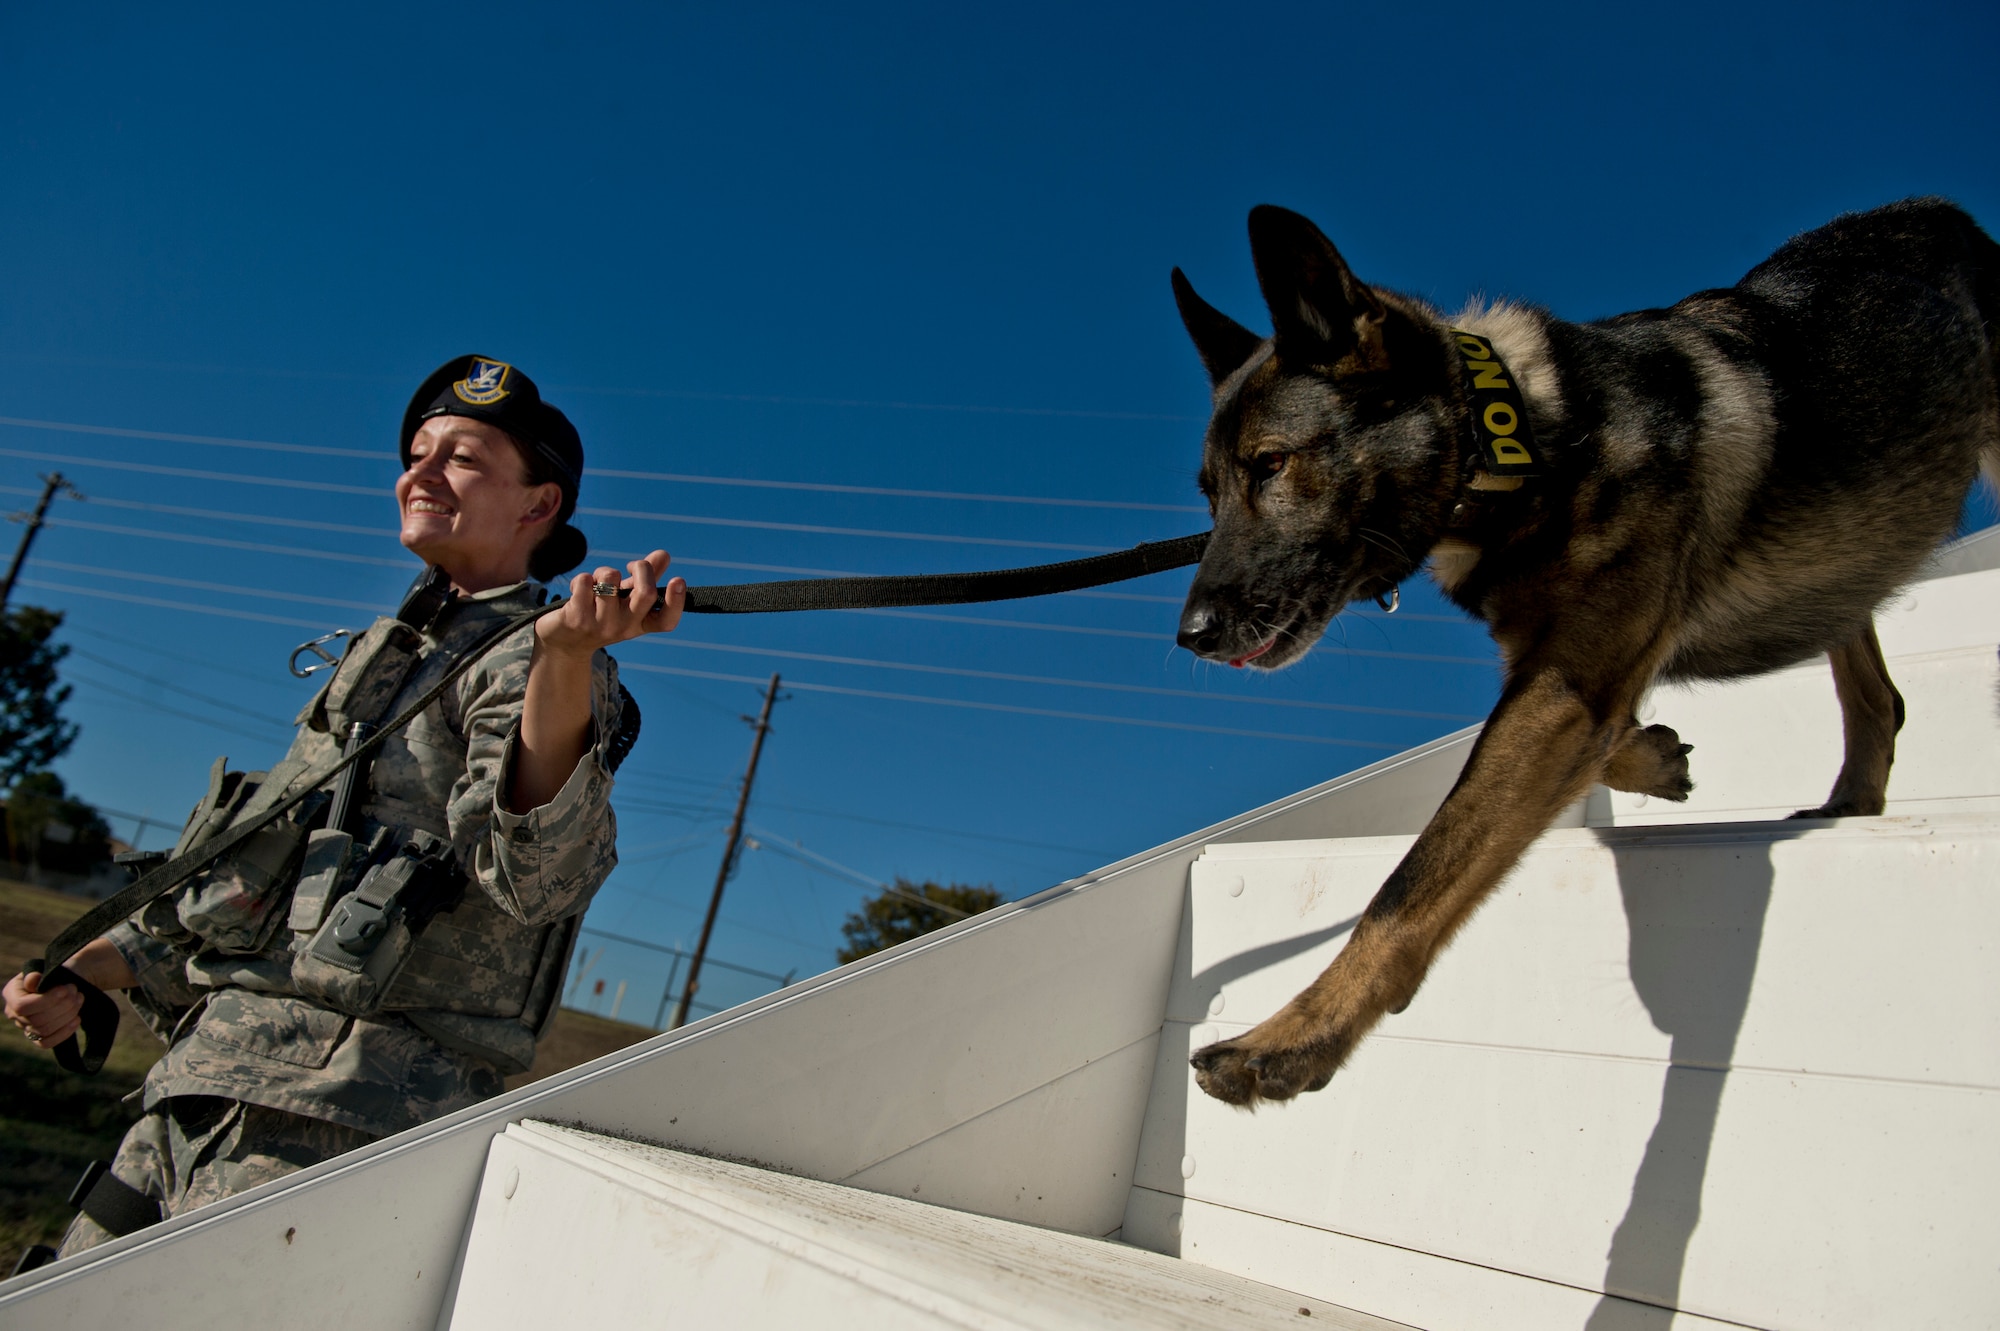 Senior Airman Chelsea LaFever escorts ZZusa down steps during training at Joint Base San Antonio-Lackland, Texas. Each morning, LaFever and other military working dog handlers interact with their assigned working dogs daily. LaFever and ZZusa have been training and developing chemistry to complete the day-to-day mission at JBSA-Lackland. (U.S. Air force photo/Staff Sgt. Vernon Young Jr.)